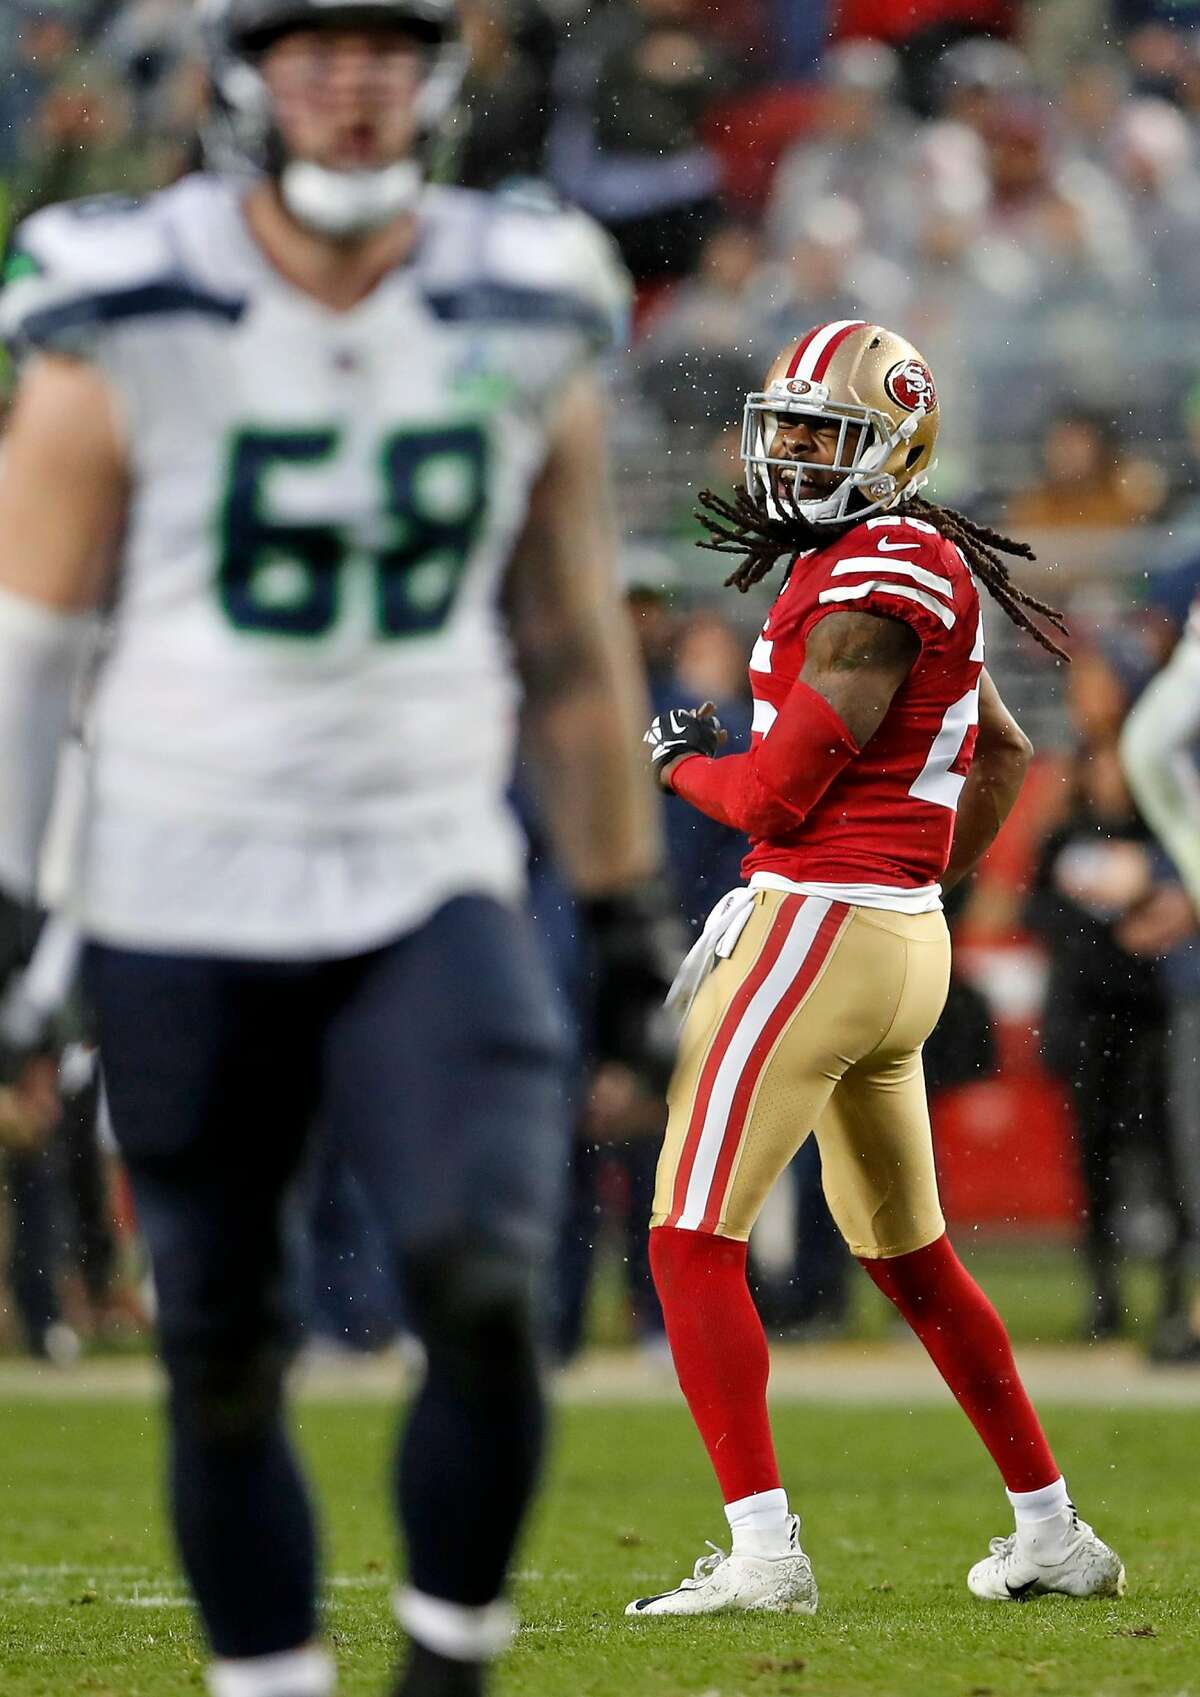 NFL THIS WEEK  49ers vs Seahawks, with Sherman on other side of rivalry